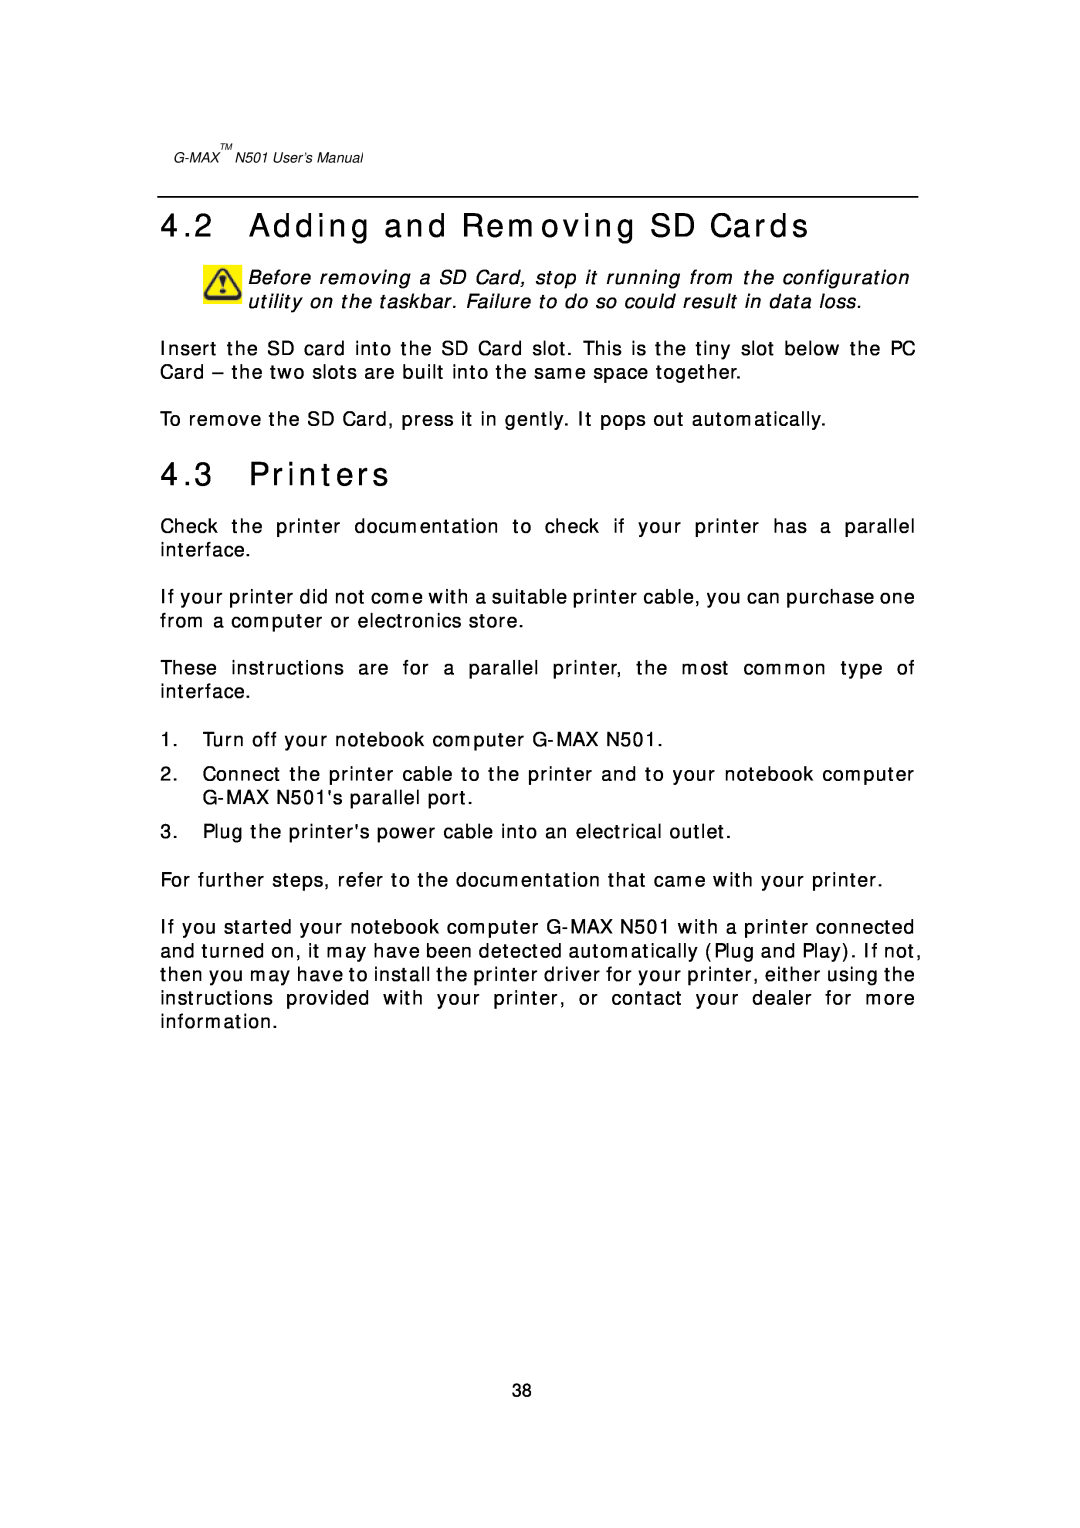 Gigabyte G-MAX N501 user manual Adding and Removing SD Cards, Printers 